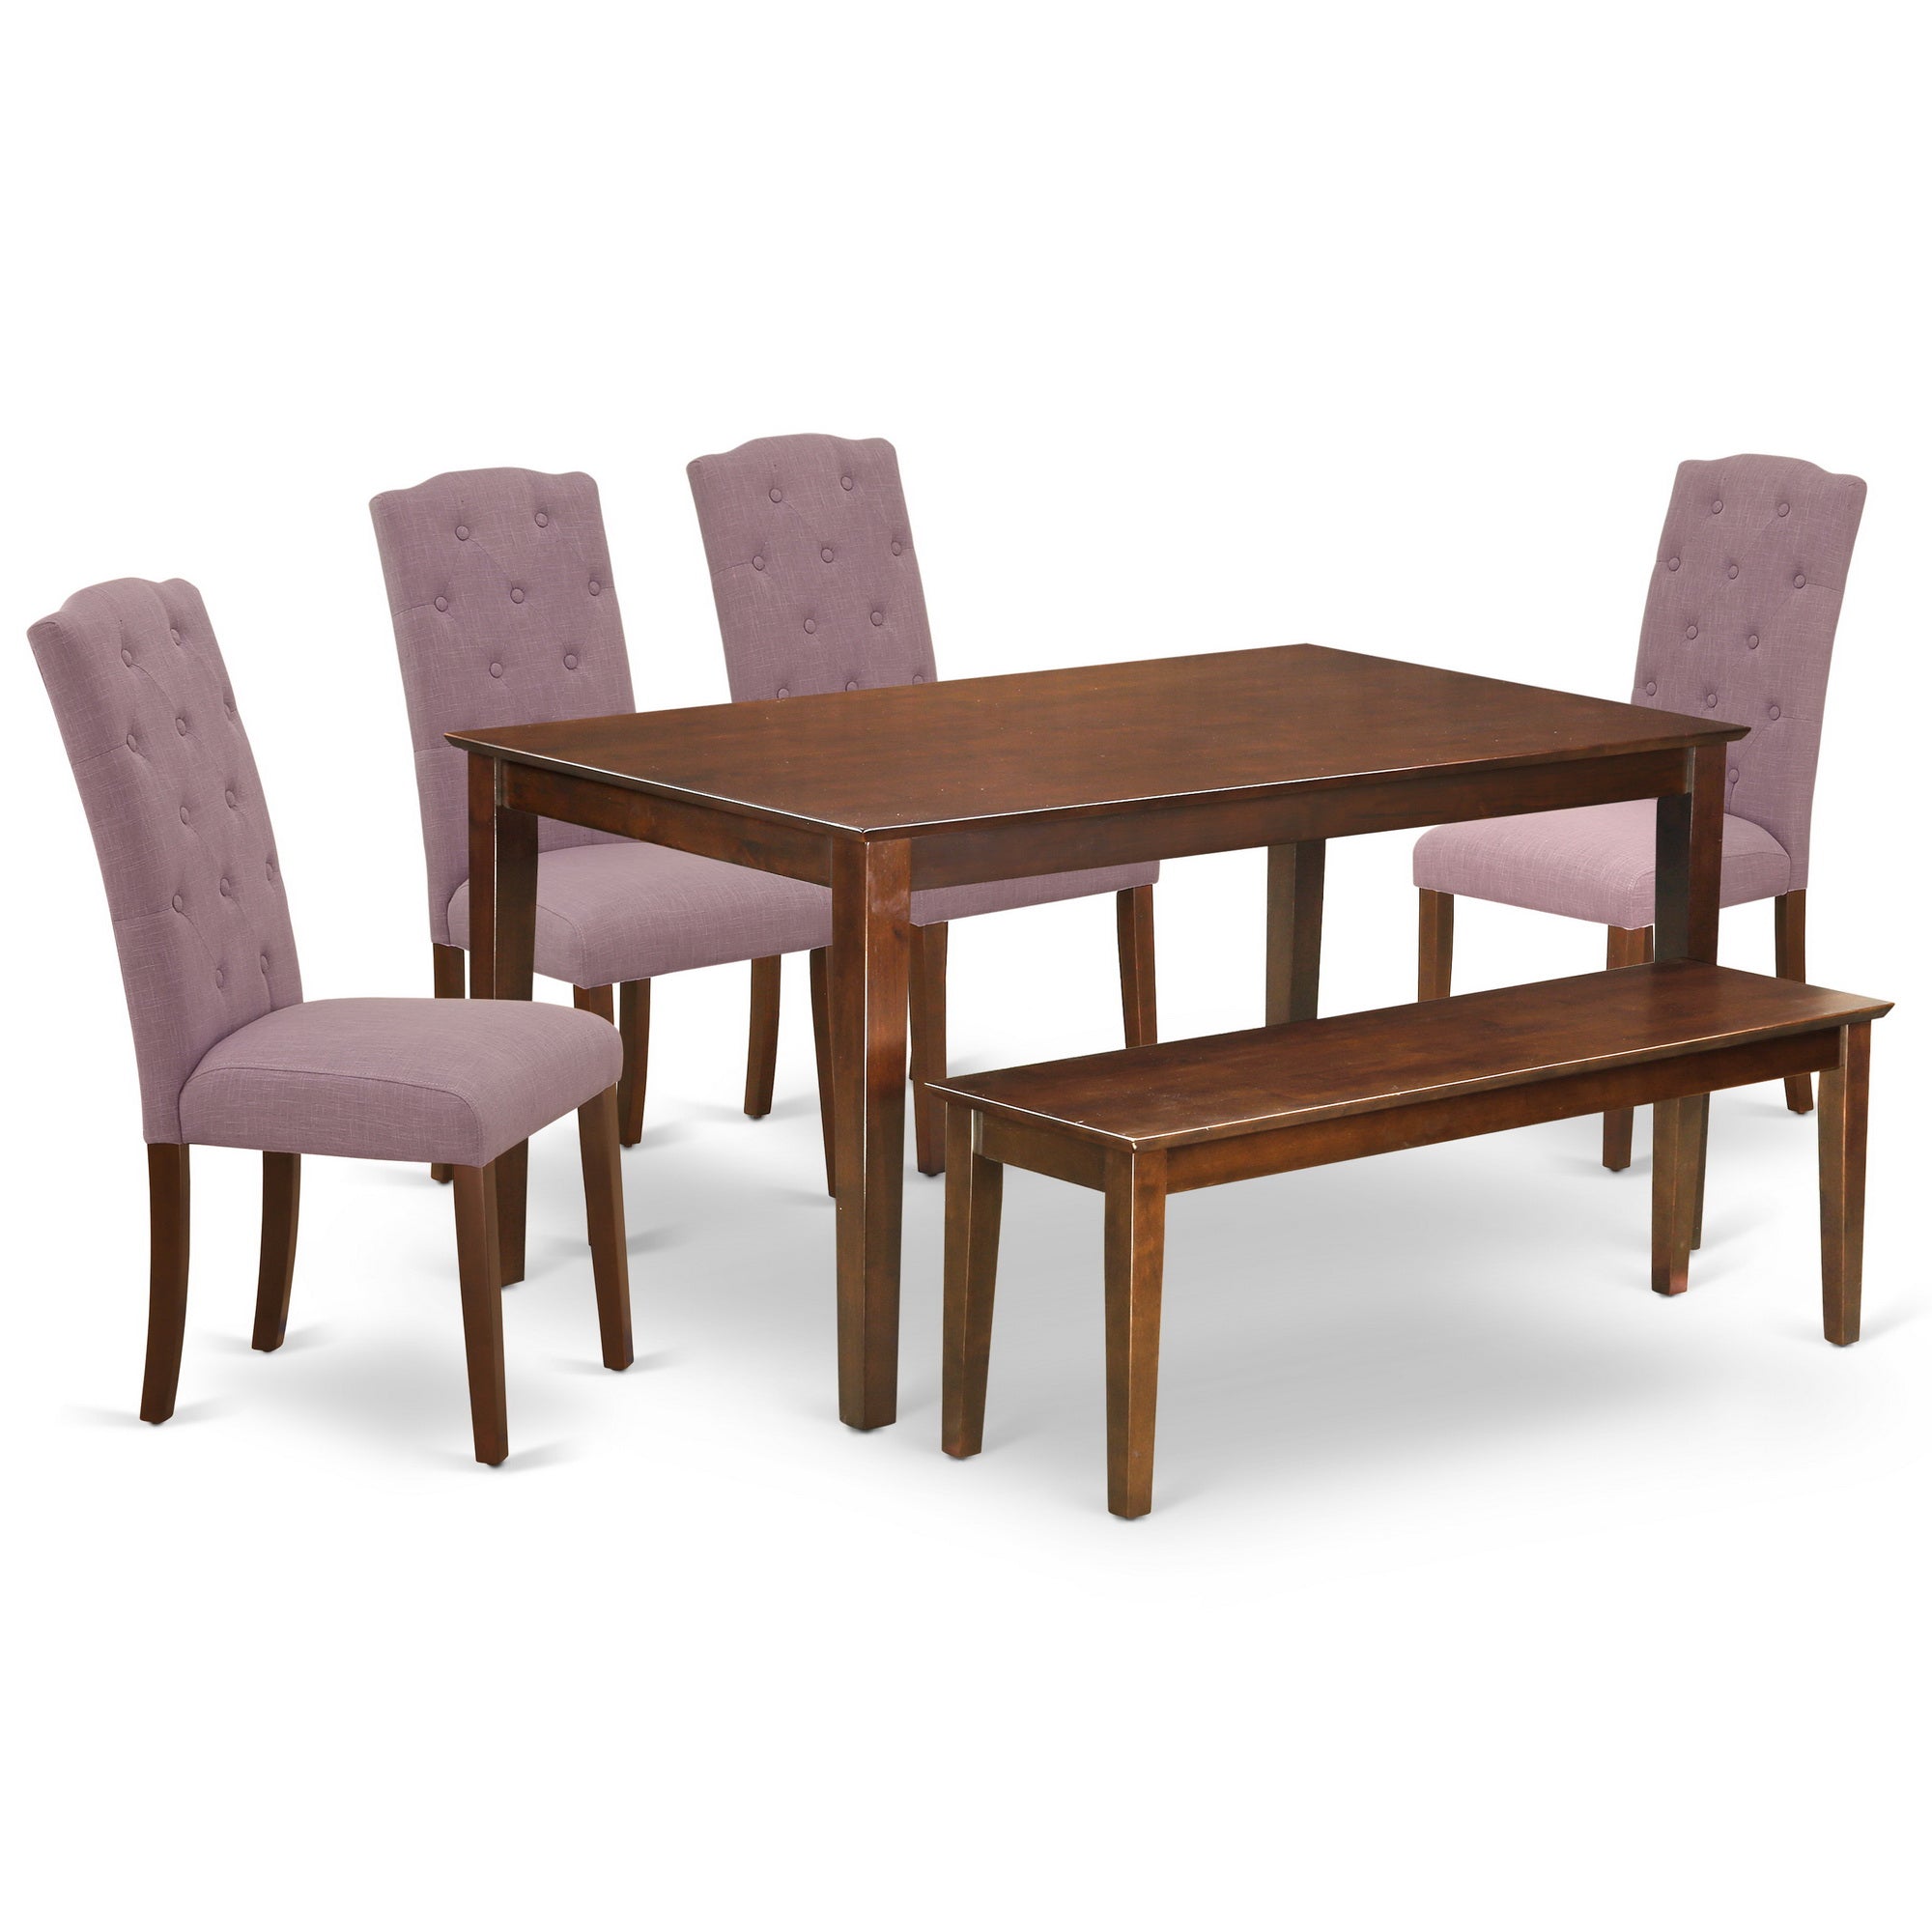 CACE6-MAH-10 6Pc Dining Set Includes a Rectangle Dinette Table and Four Parson Chairs with Dahlia Fabric and a Bench, Mahogany Finish